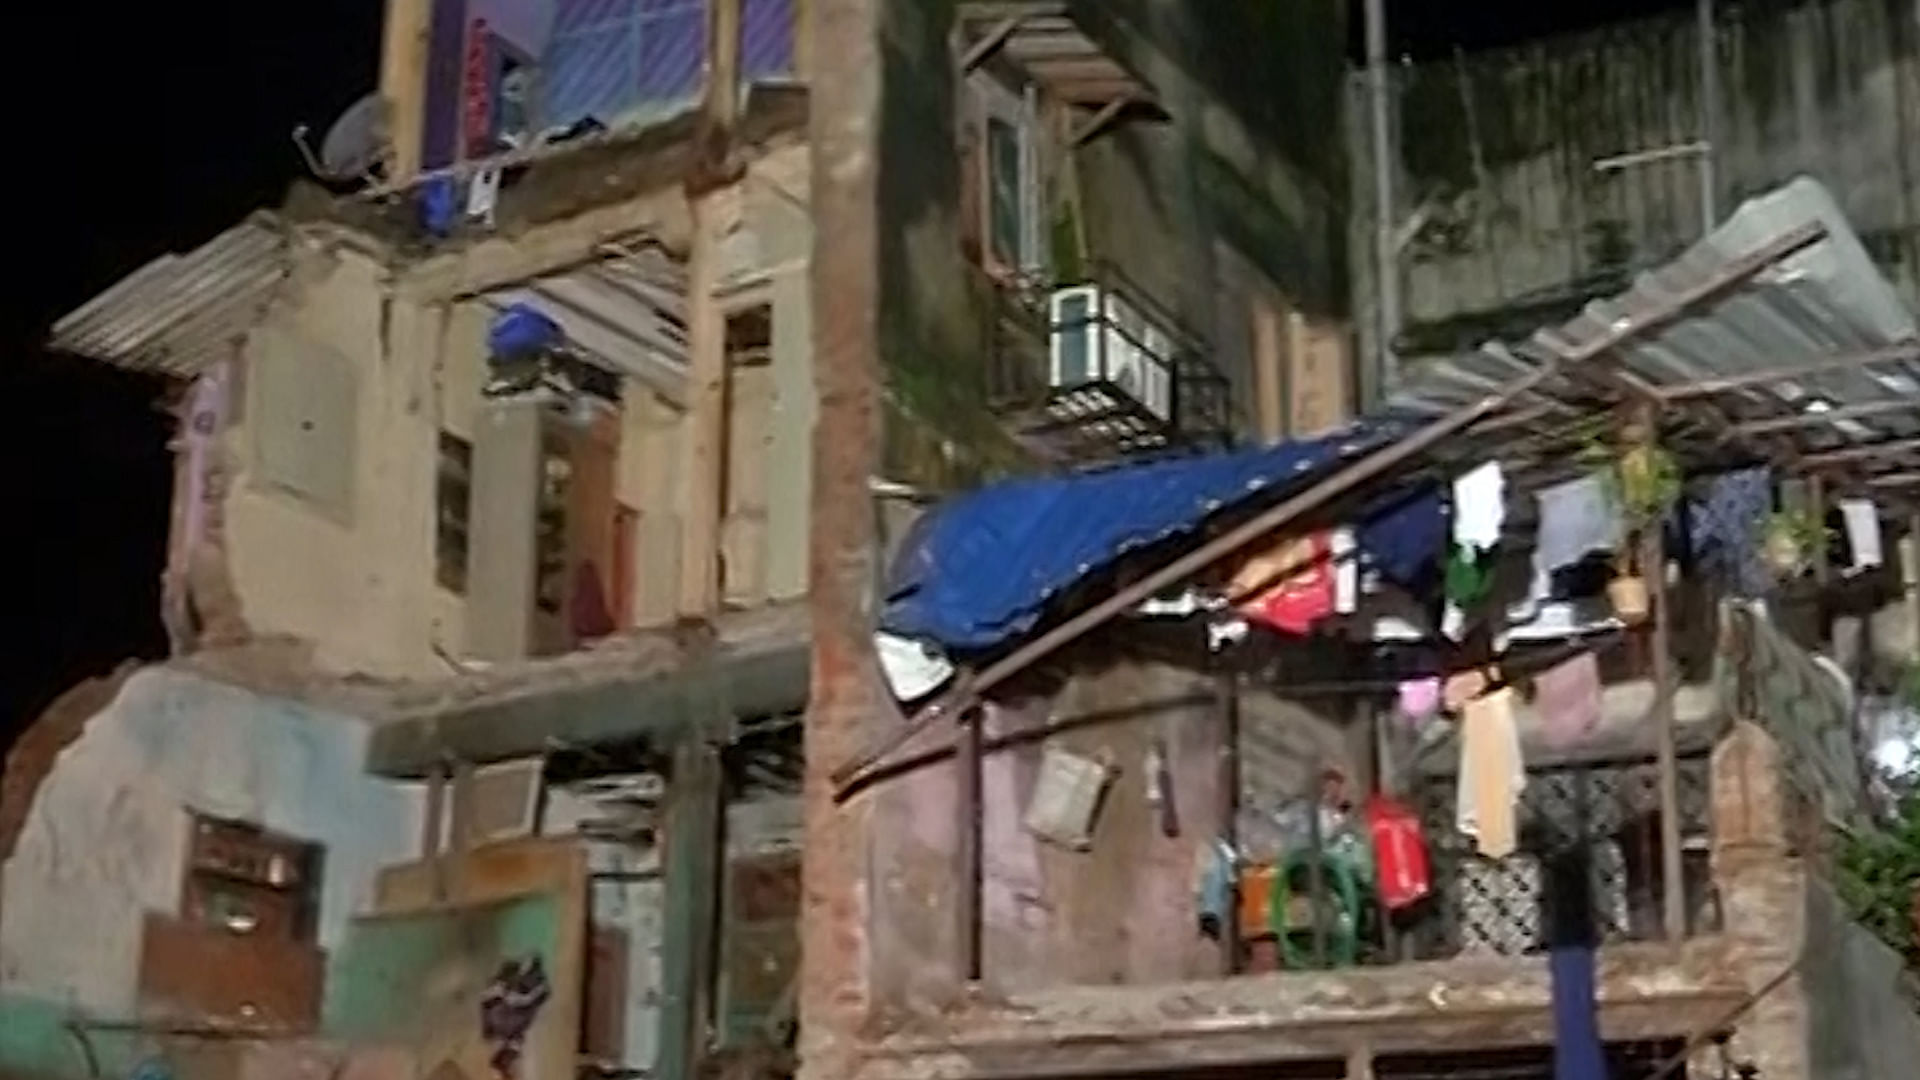 Old residential building collapsed injuring one person, as four people were rescued. (Photo: ANI screengrab)